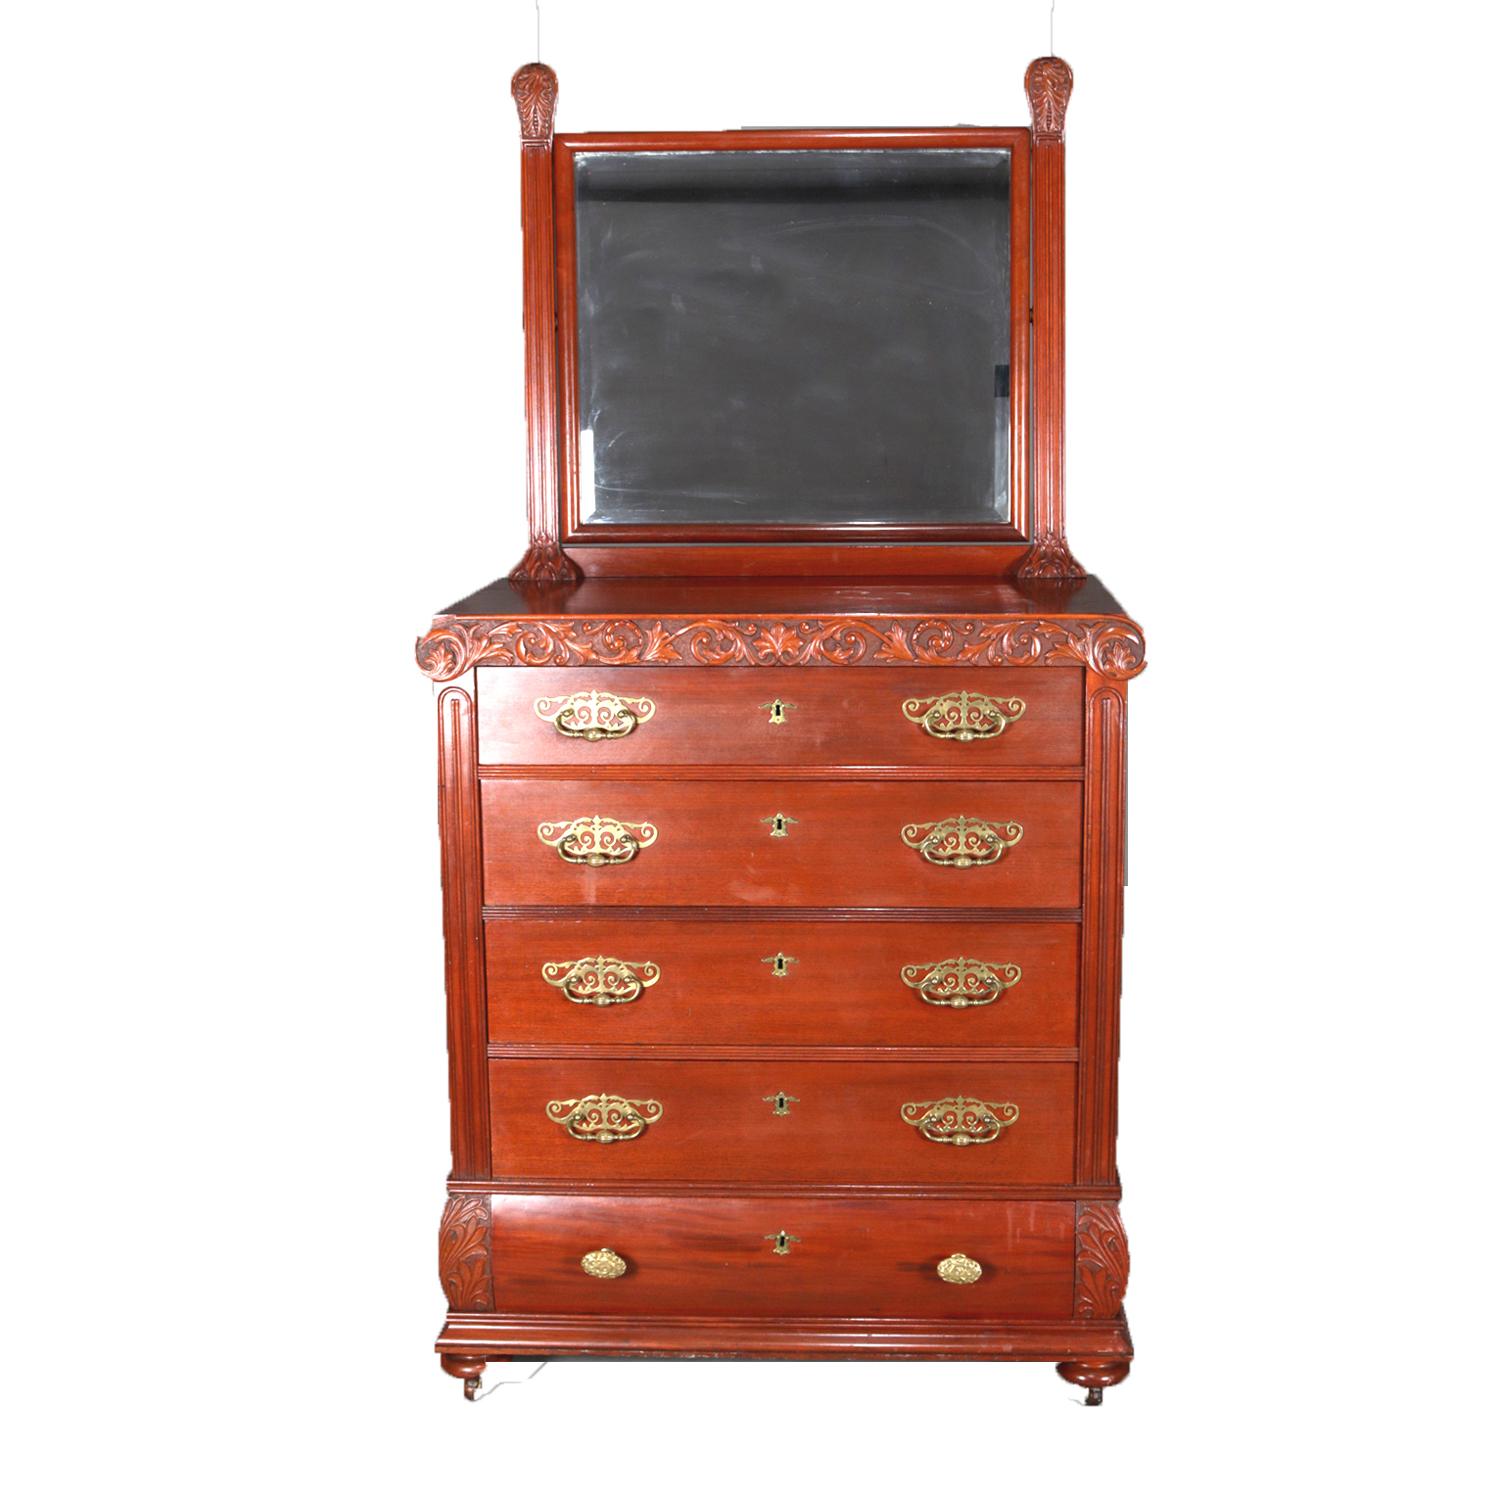 Antique R. J. Horner Bros. School high chest features mahogany construction with mirror over chest with carved scrolled foliate frieze above five long drawers, the lower being convex and flanked by carved acanthus, circa 1900.

Measures - 79